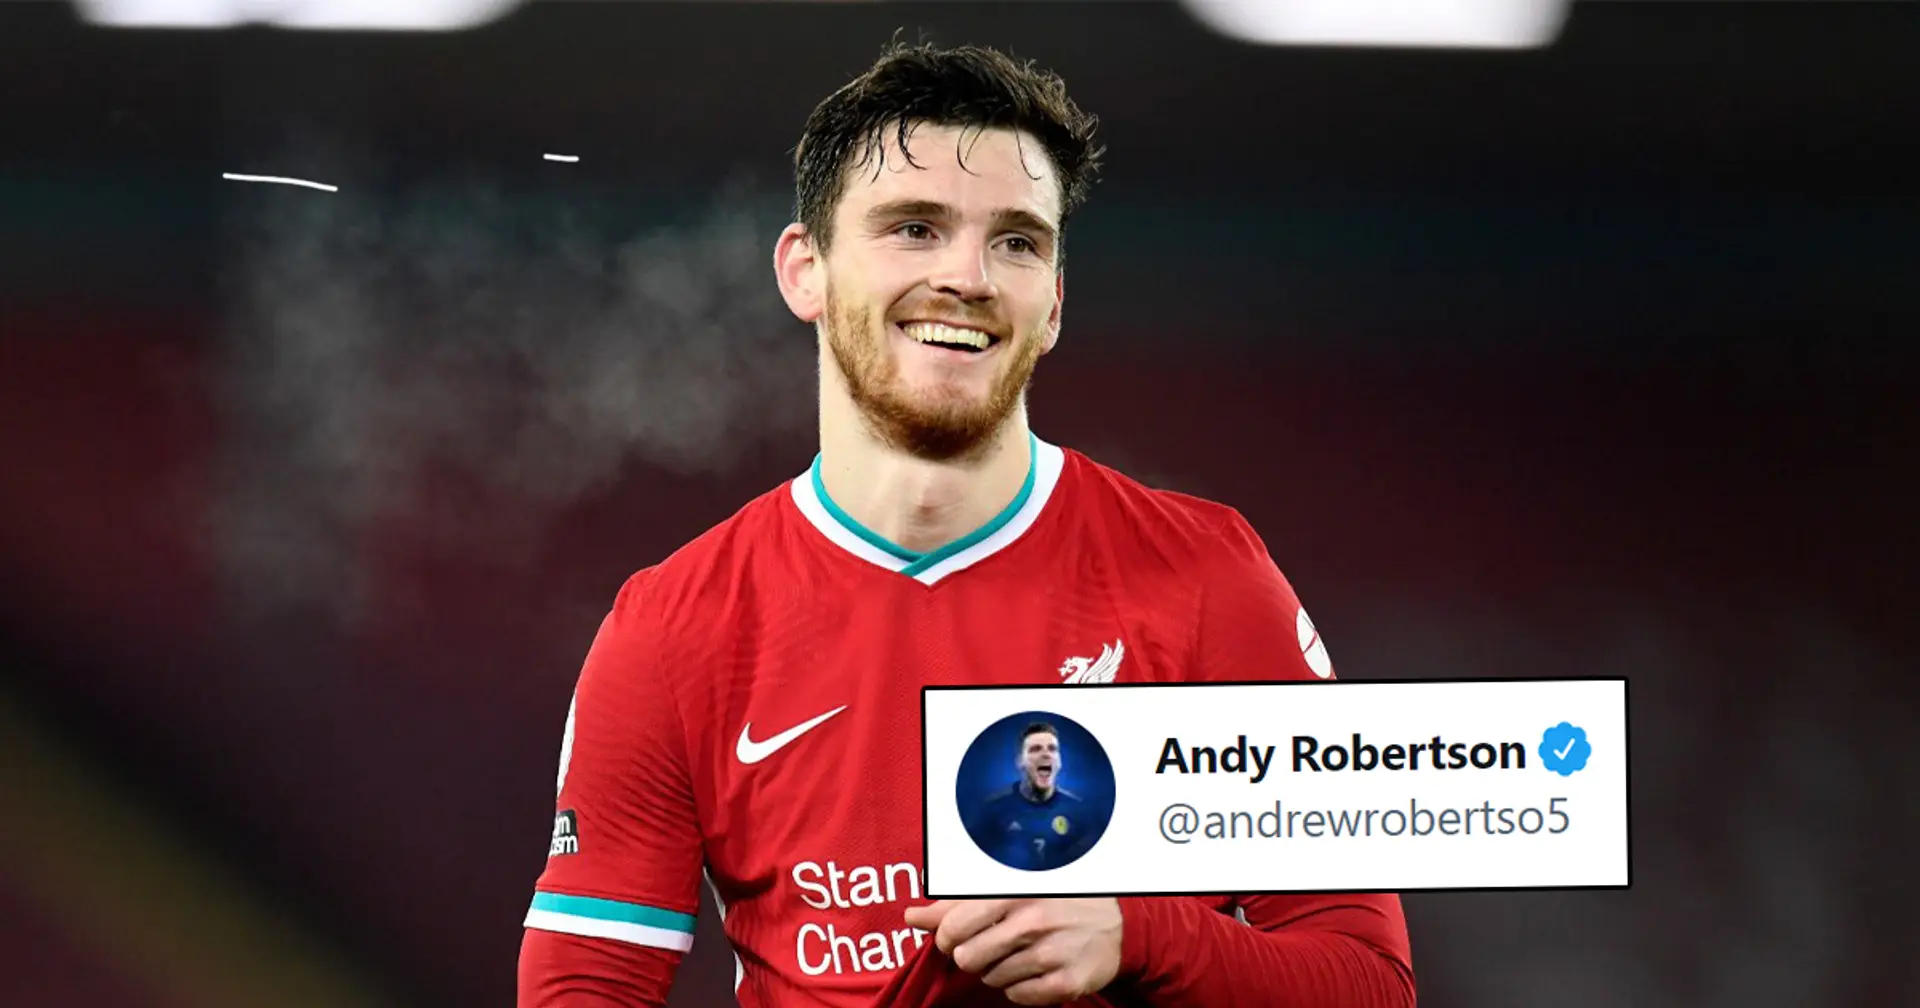 'Time flies when you are having fun!': Robertson sends message to fans as he marks 4-year anniversary at LFC